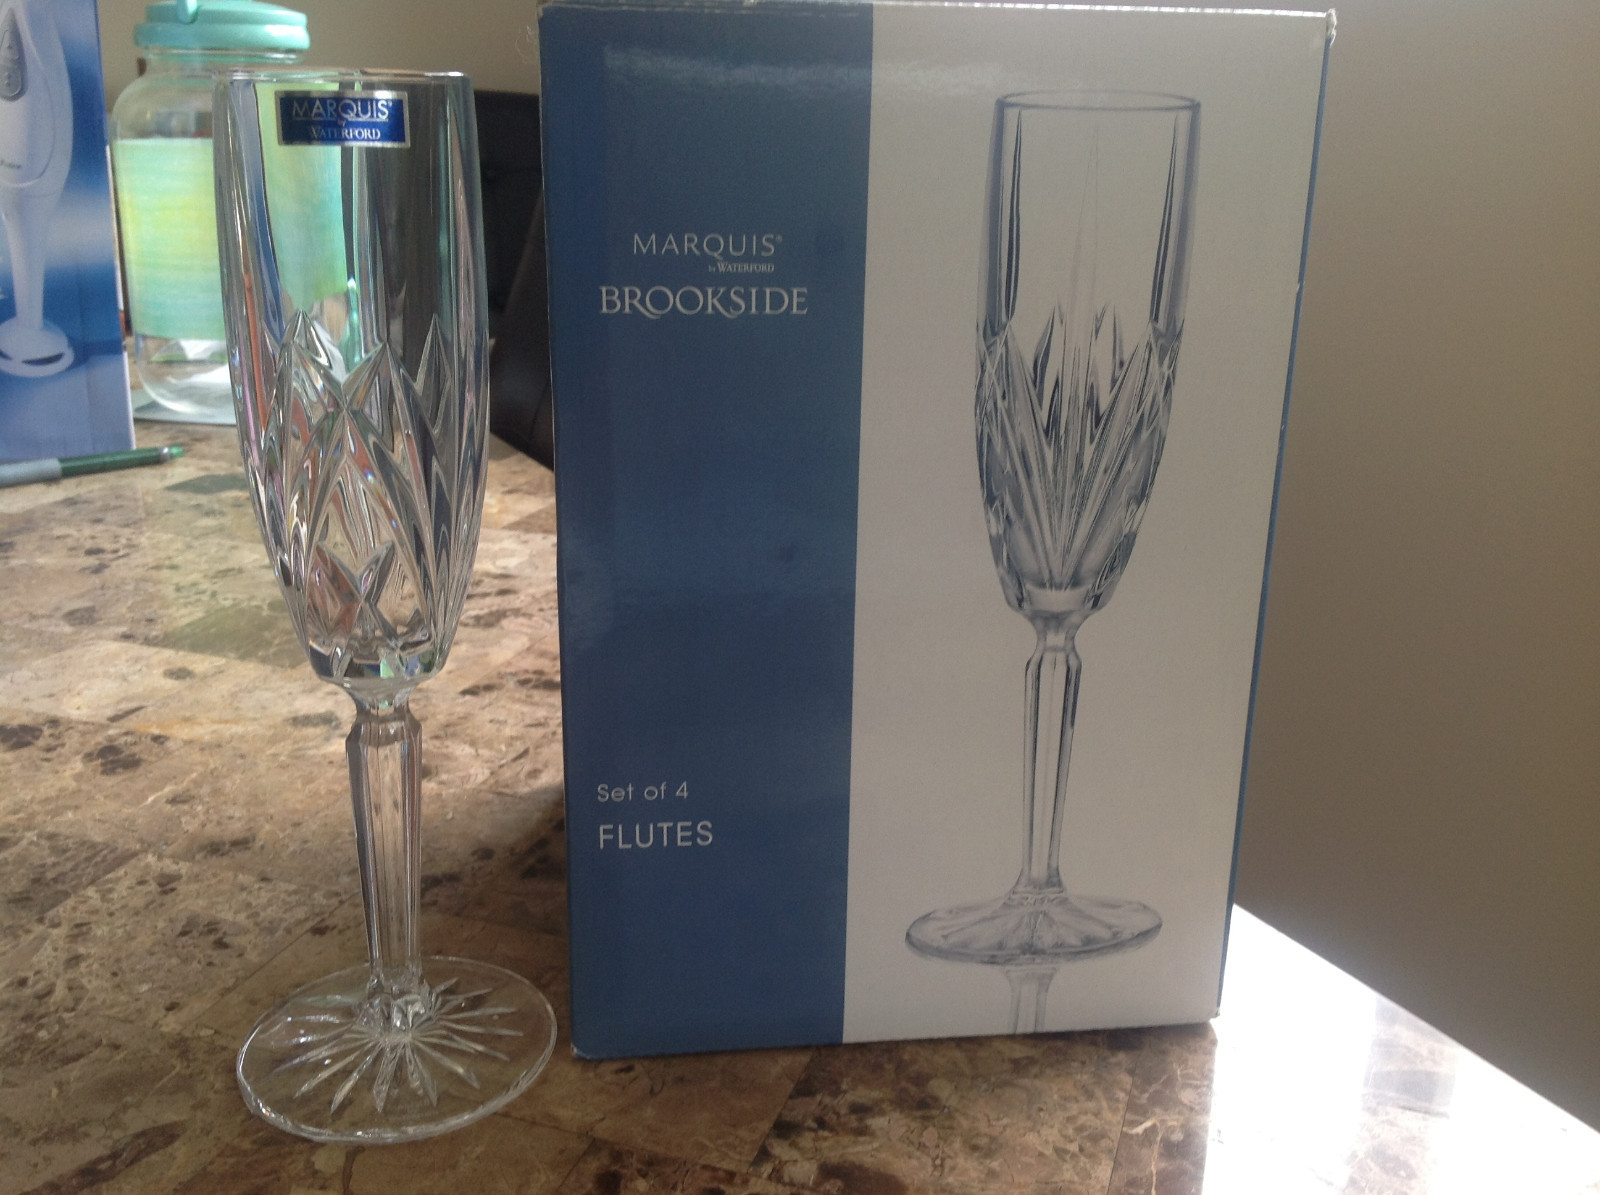 Marquis Waterford Brookside Champagne Flutes, set of 4